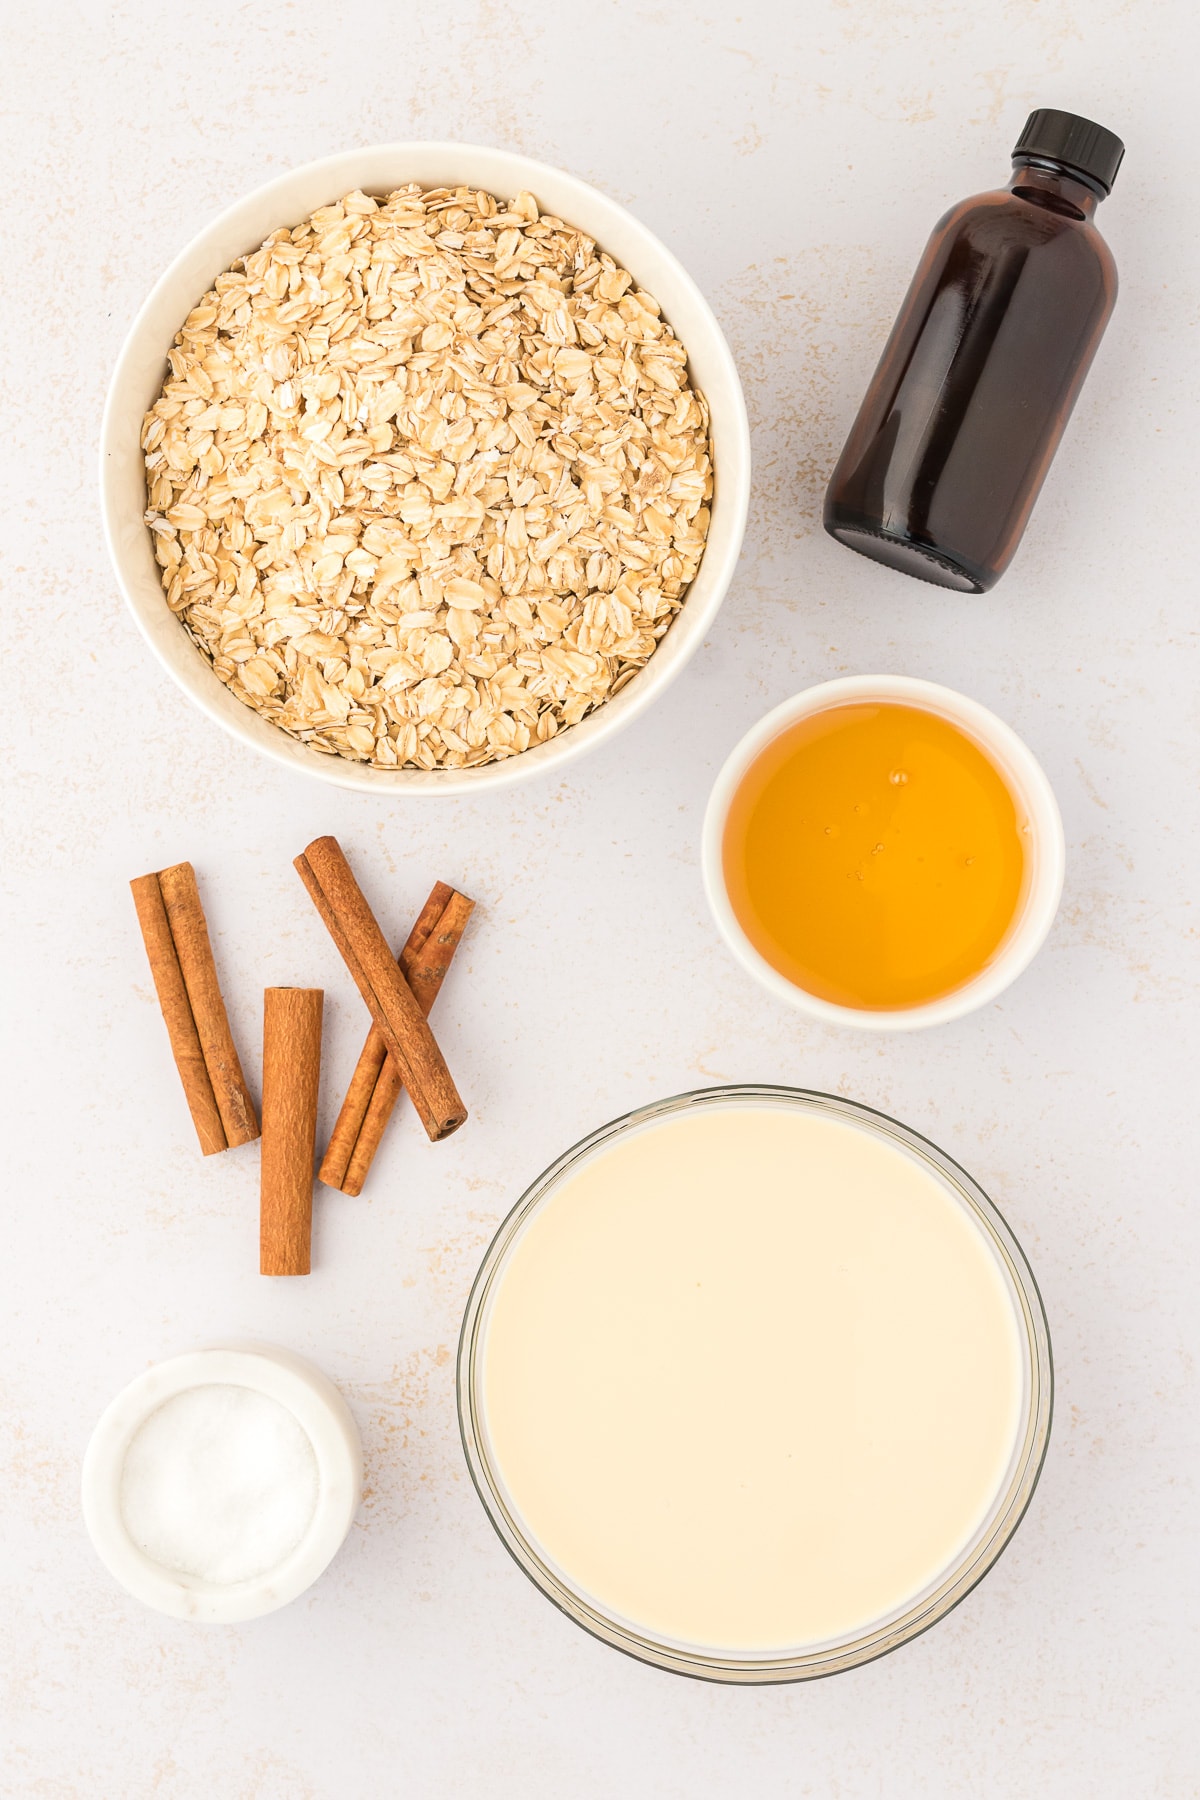 Ingredients for Mexican oatmeal breakfast, including old fashioned oats, cinnamon sticks, evaporated milk, honey, and vanilla with a dash of salt.